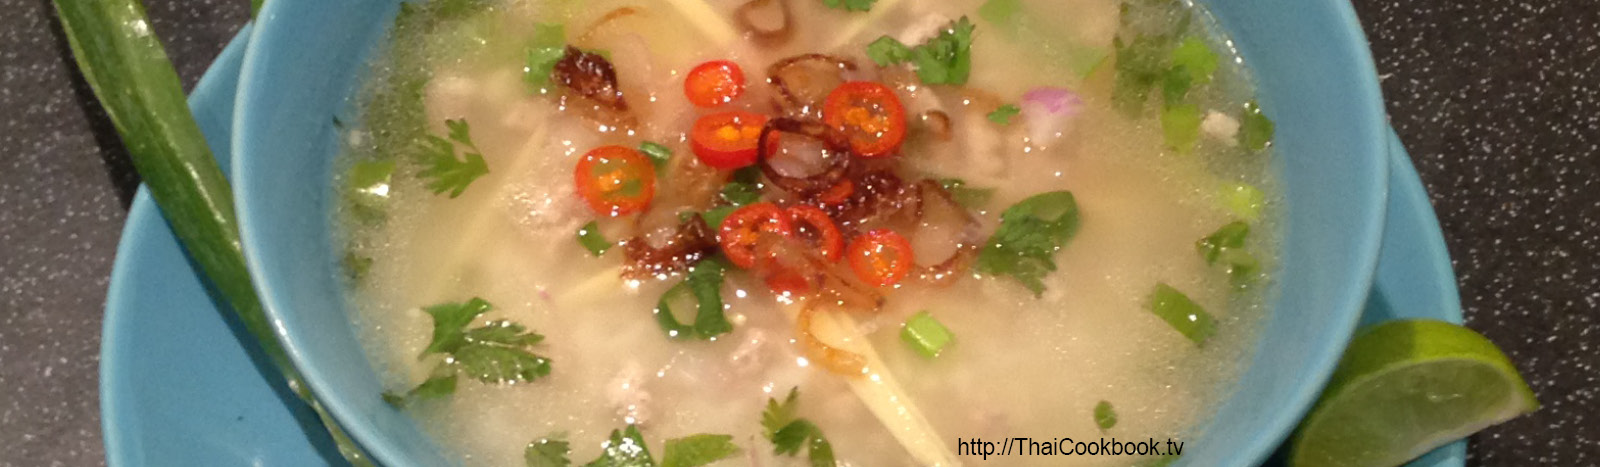 Authentic Thai recipe for Rice Soup with Minced Pork